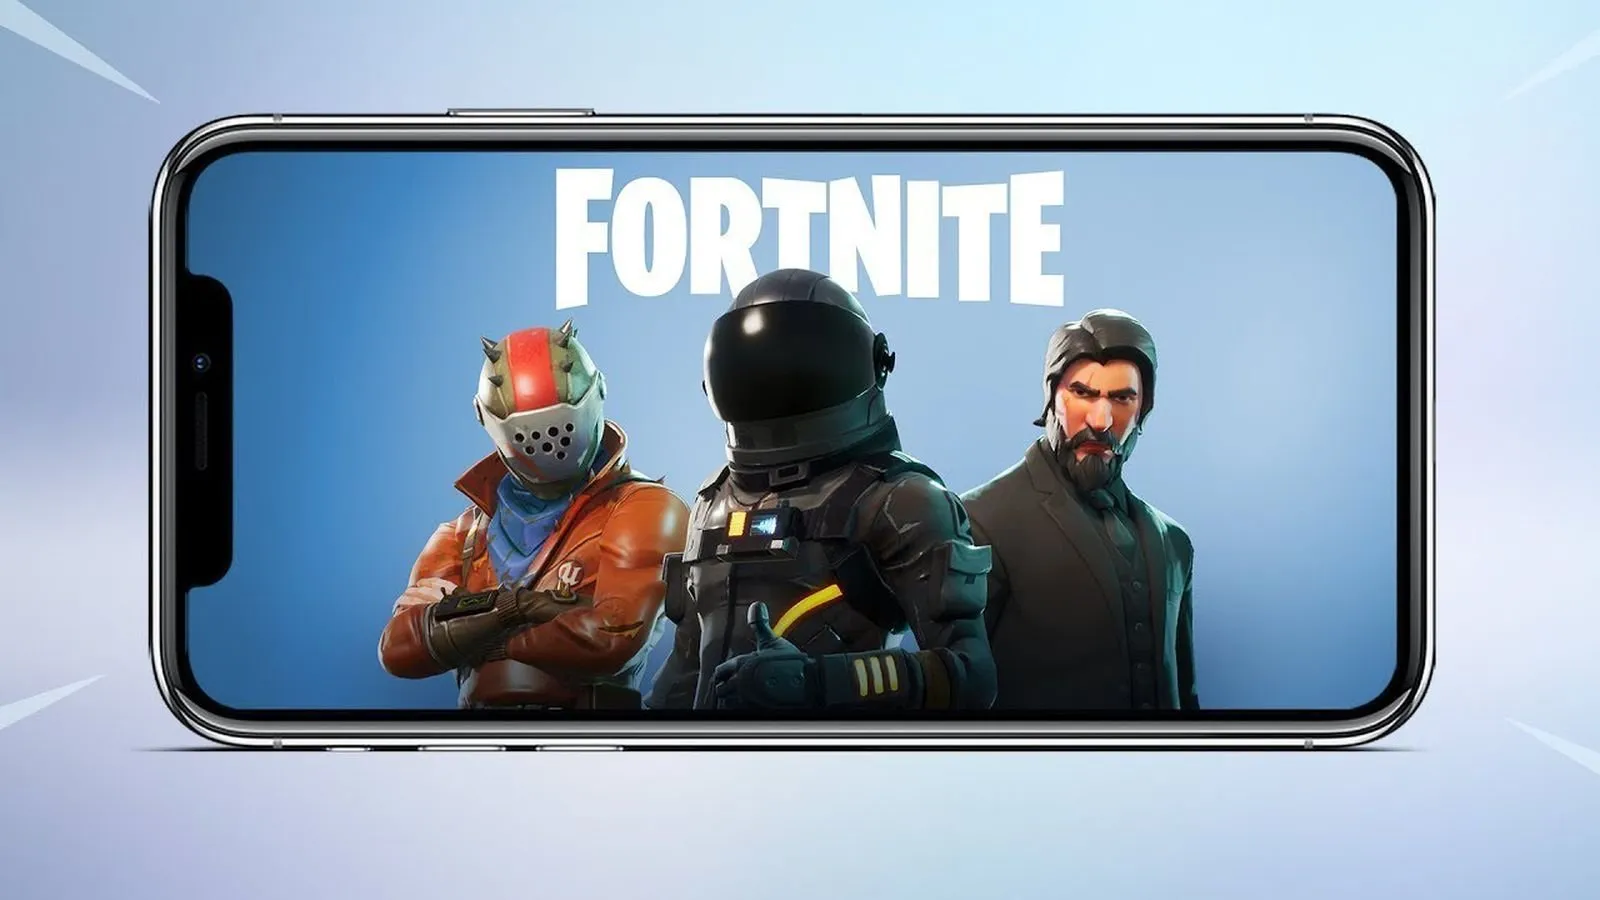 Fortnite for iPhone Gets Major Update amid Legal Drama and New EU Rules